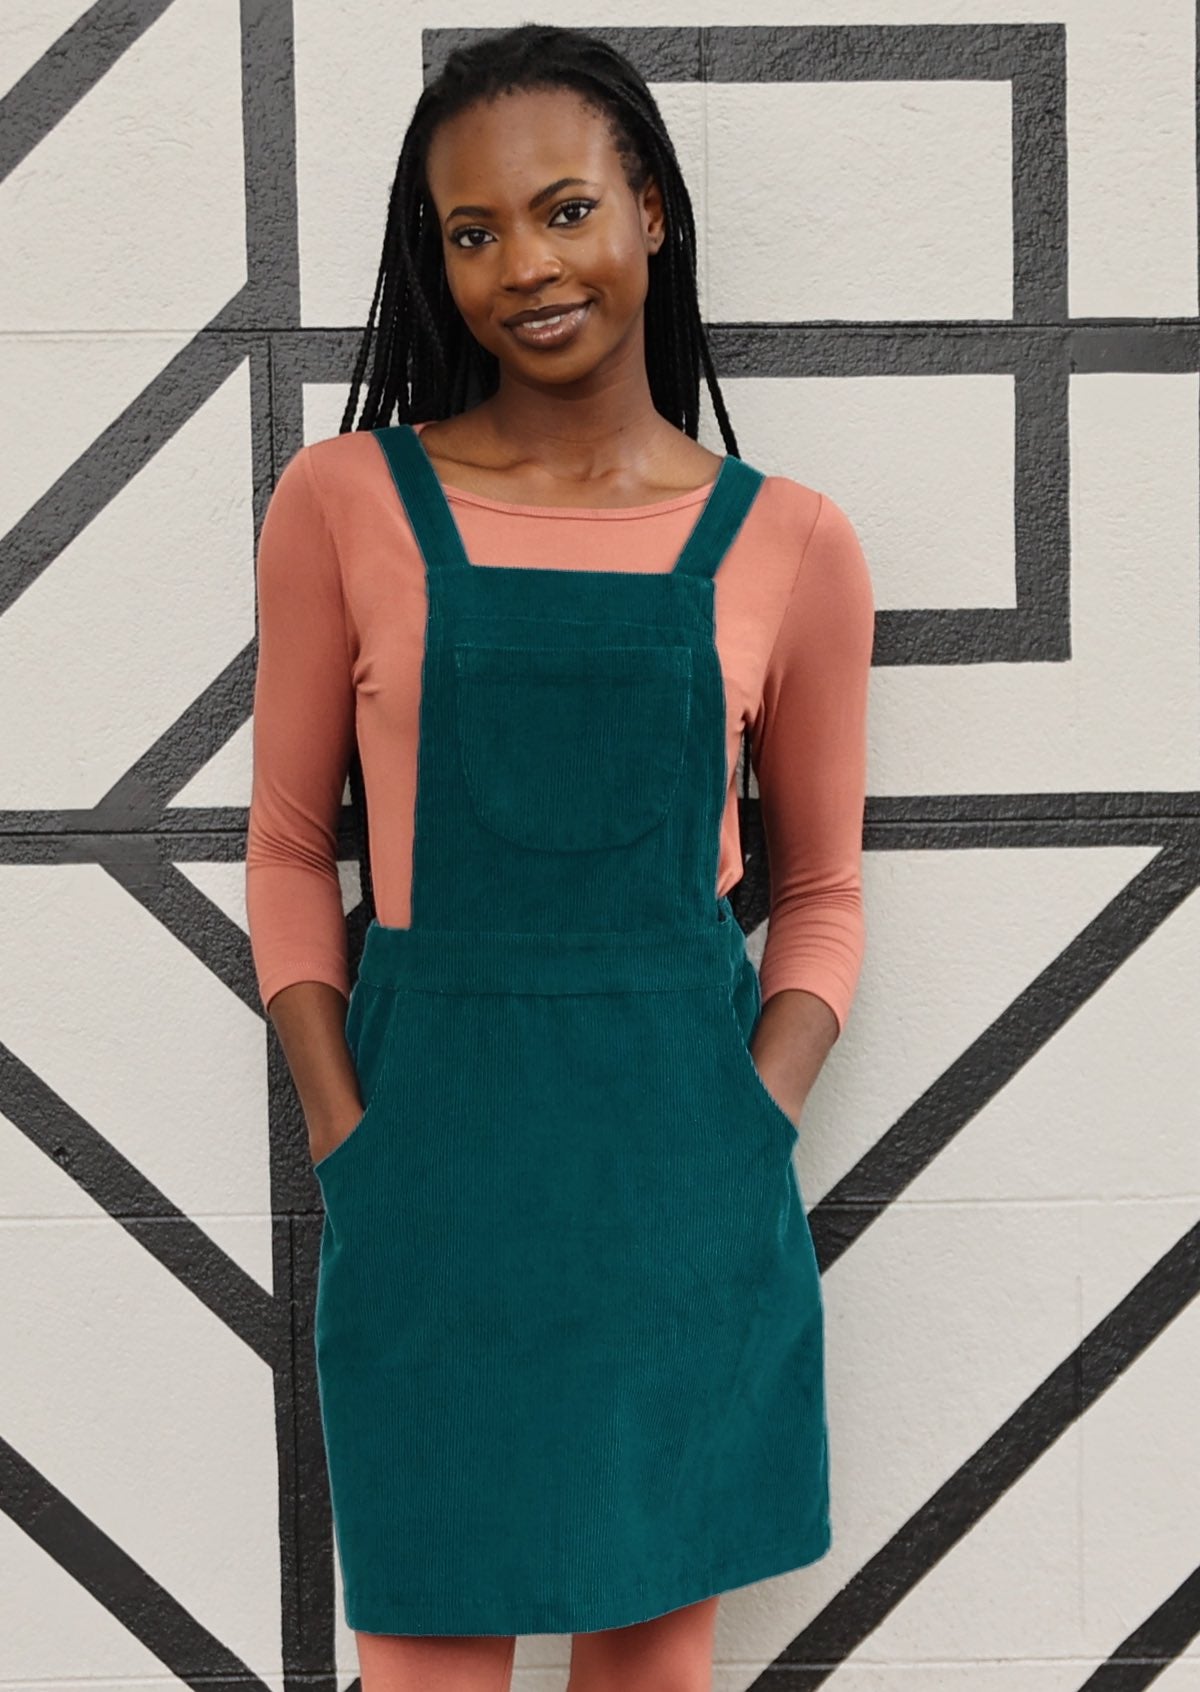 woman wearing teal corduroy pinafore over pale pink top